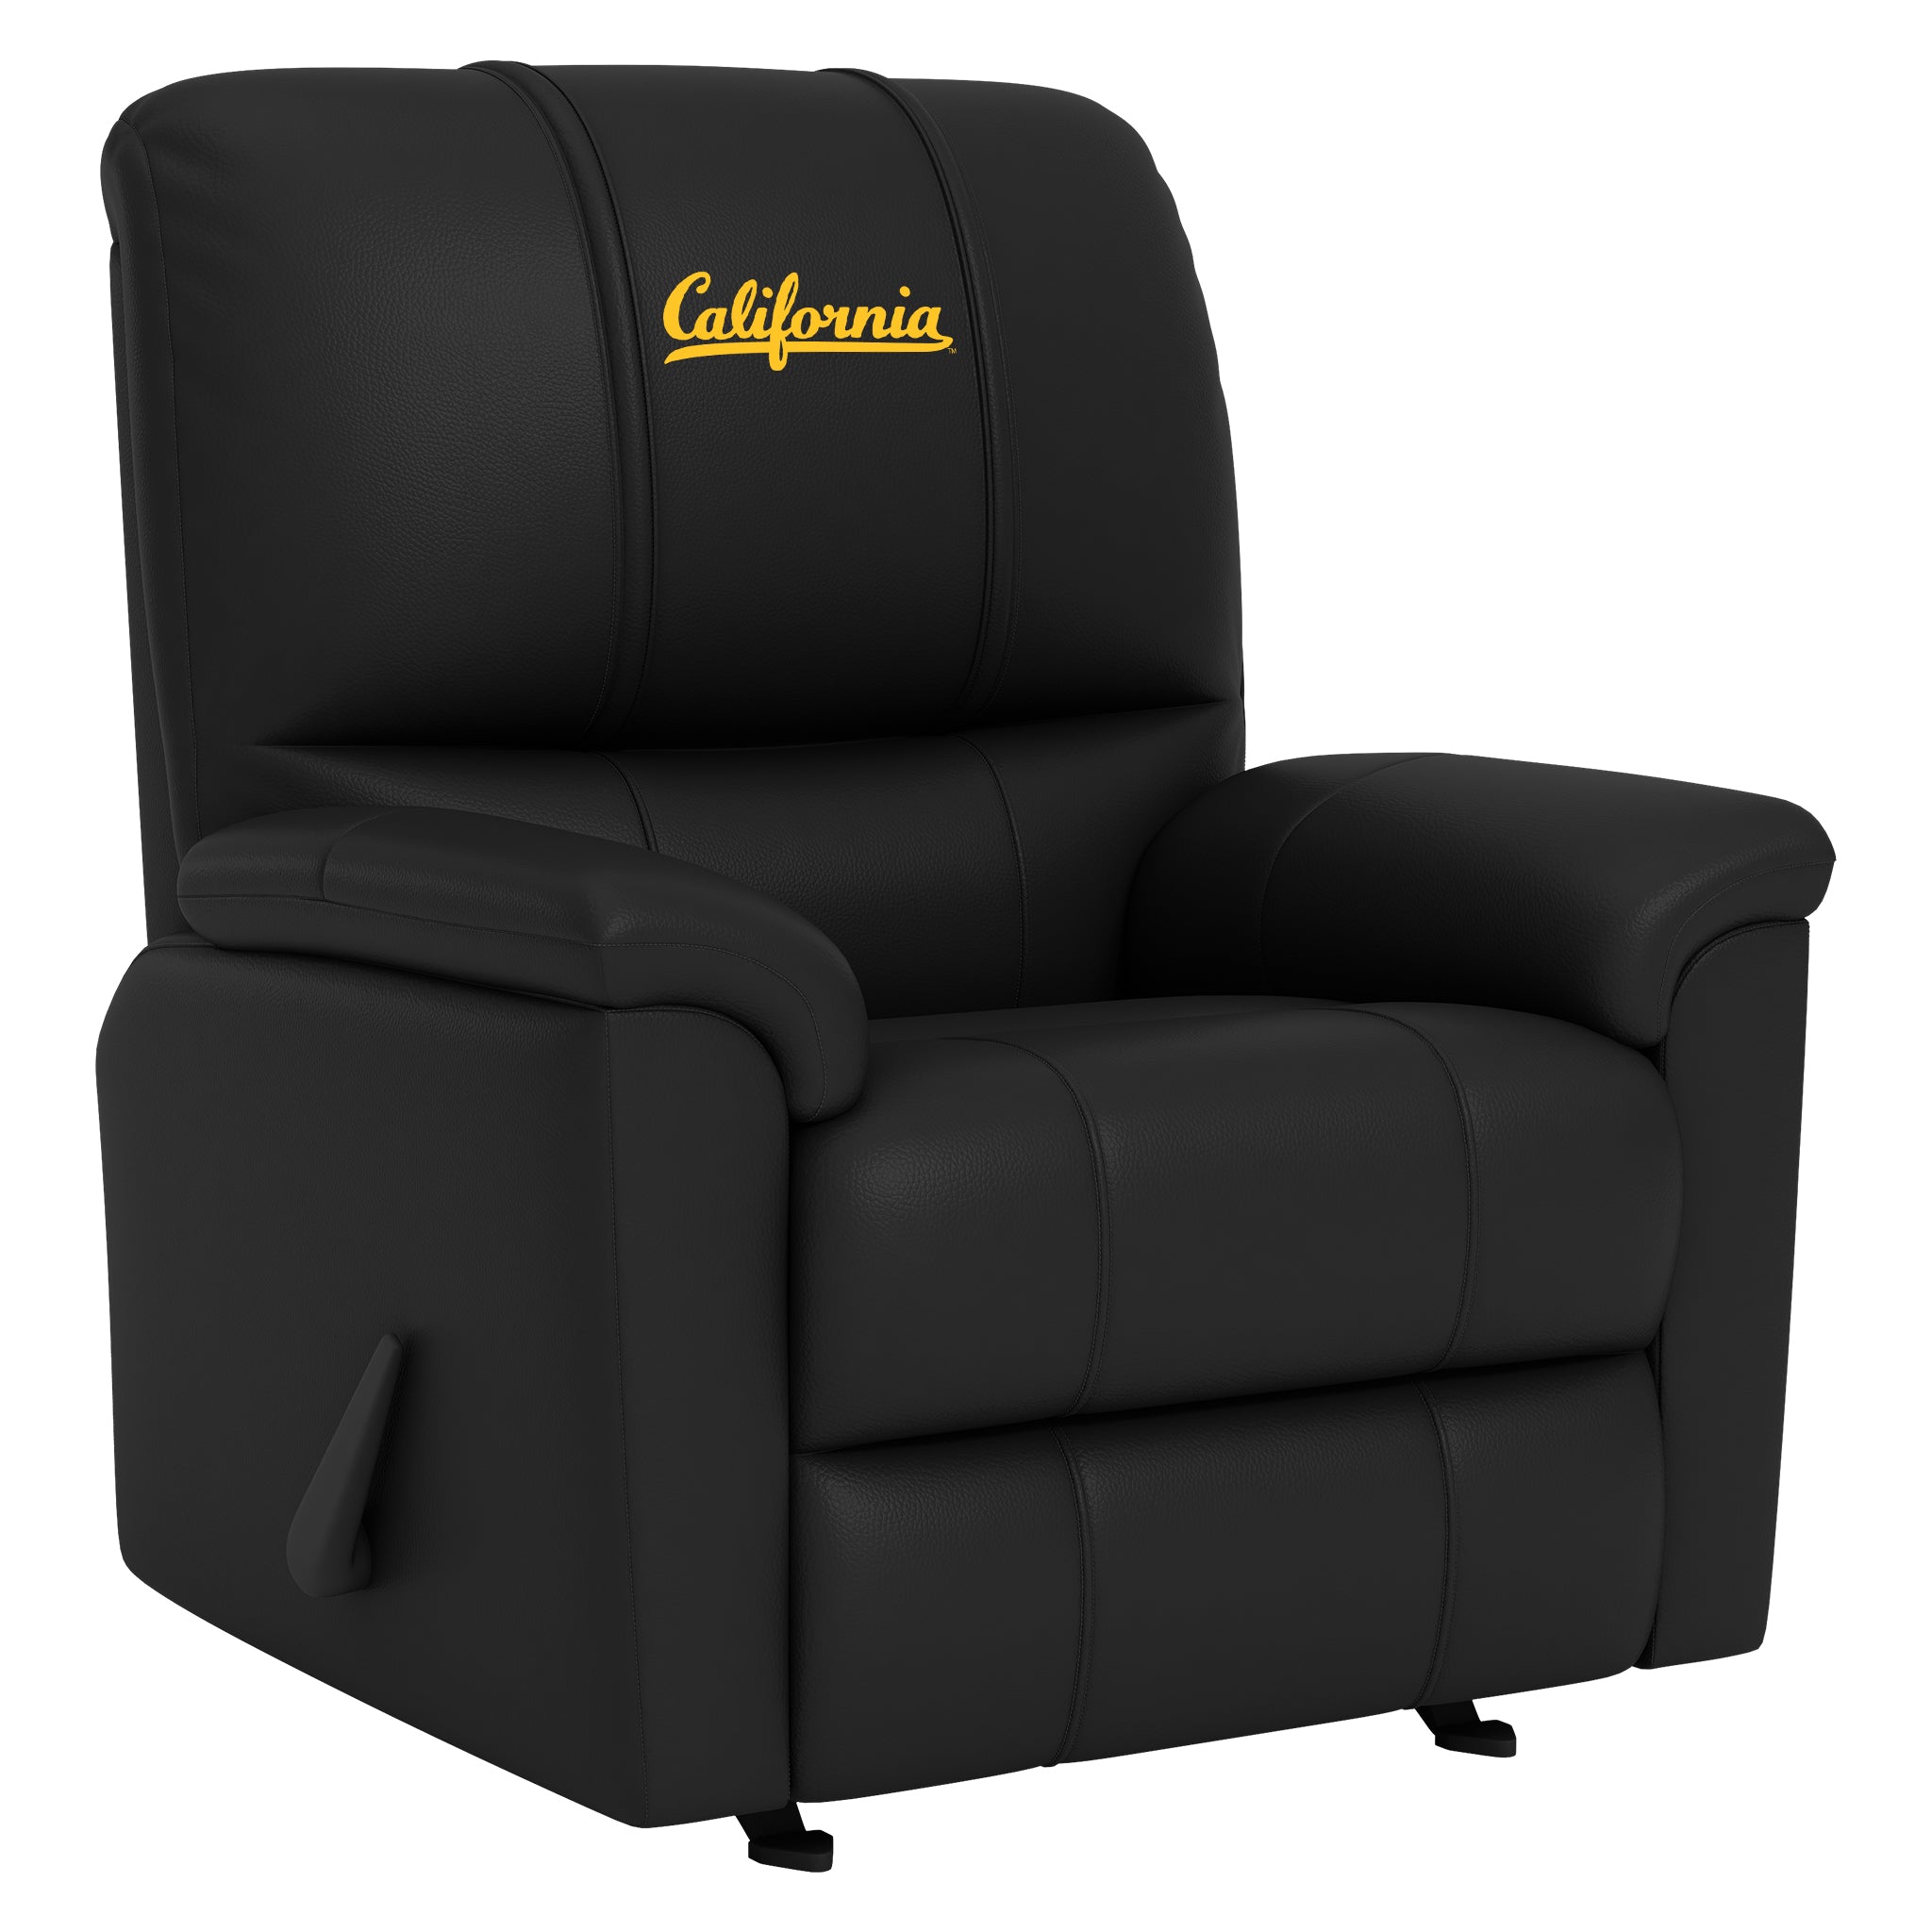 California Golden Bears Silver Club Chair with California Golden Bears Wordmark Logo